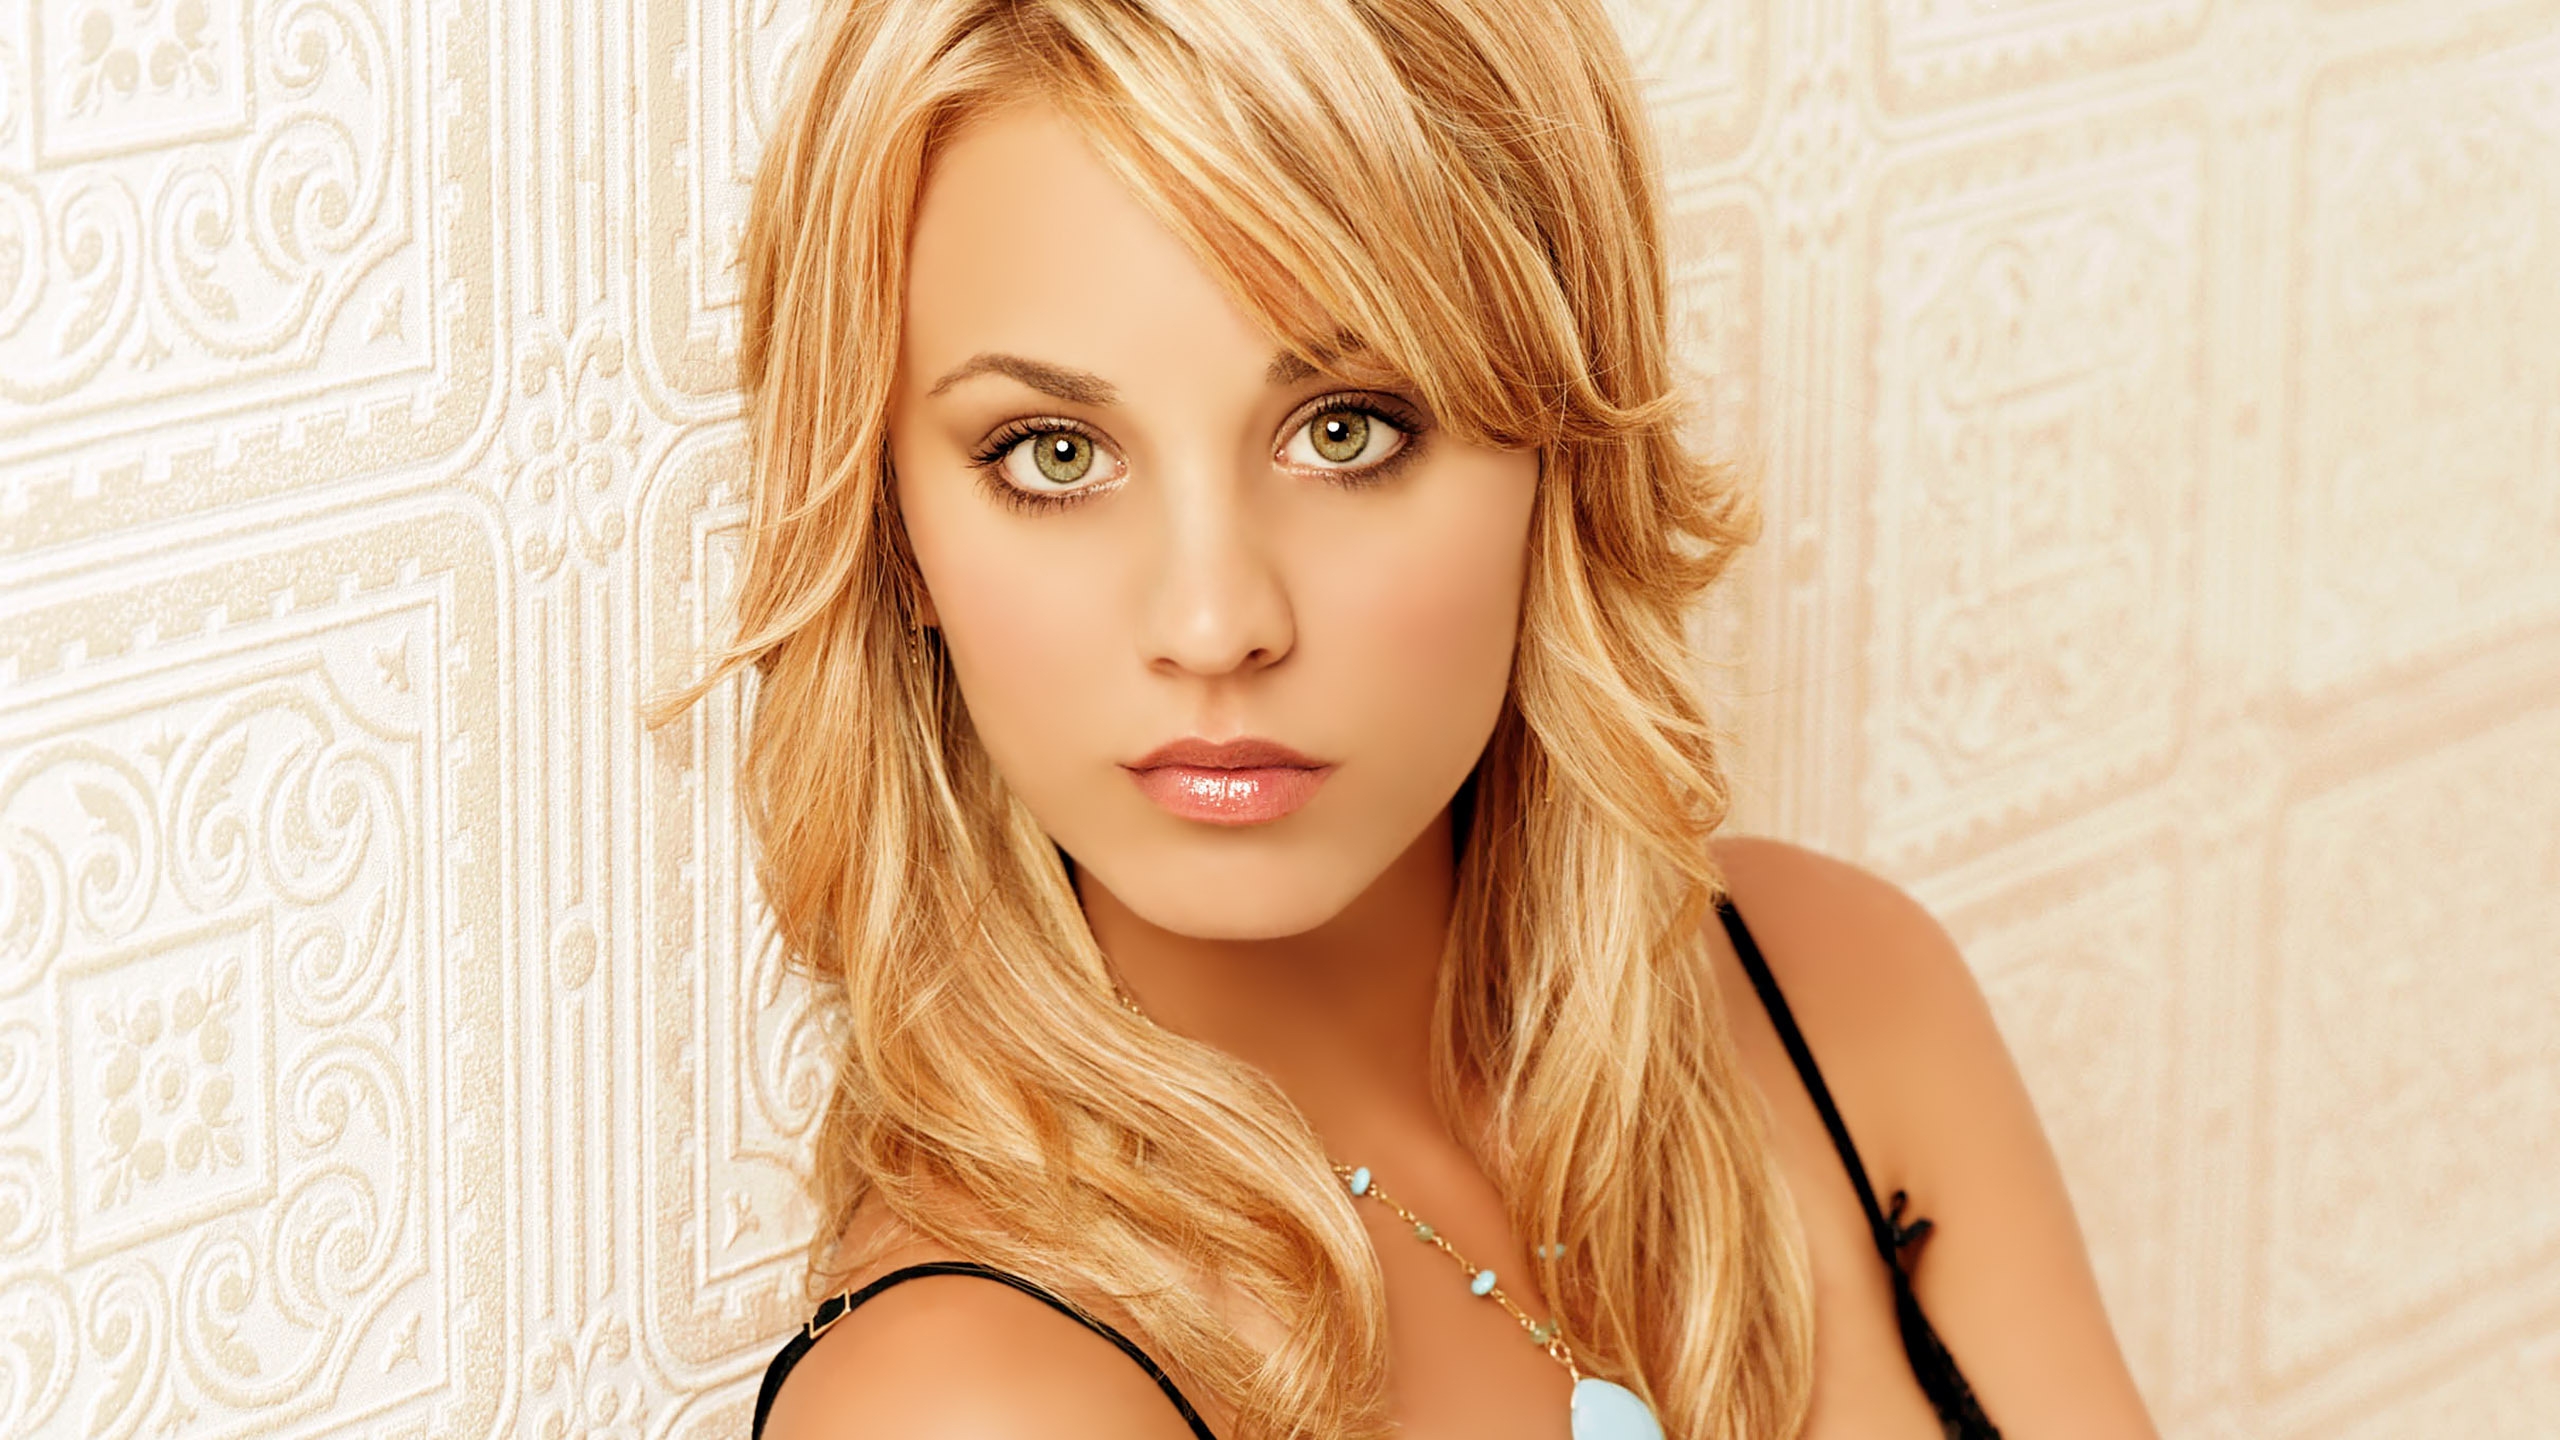 Beautiful Kaley Cuoco for 2560x1440 HDTV resolution